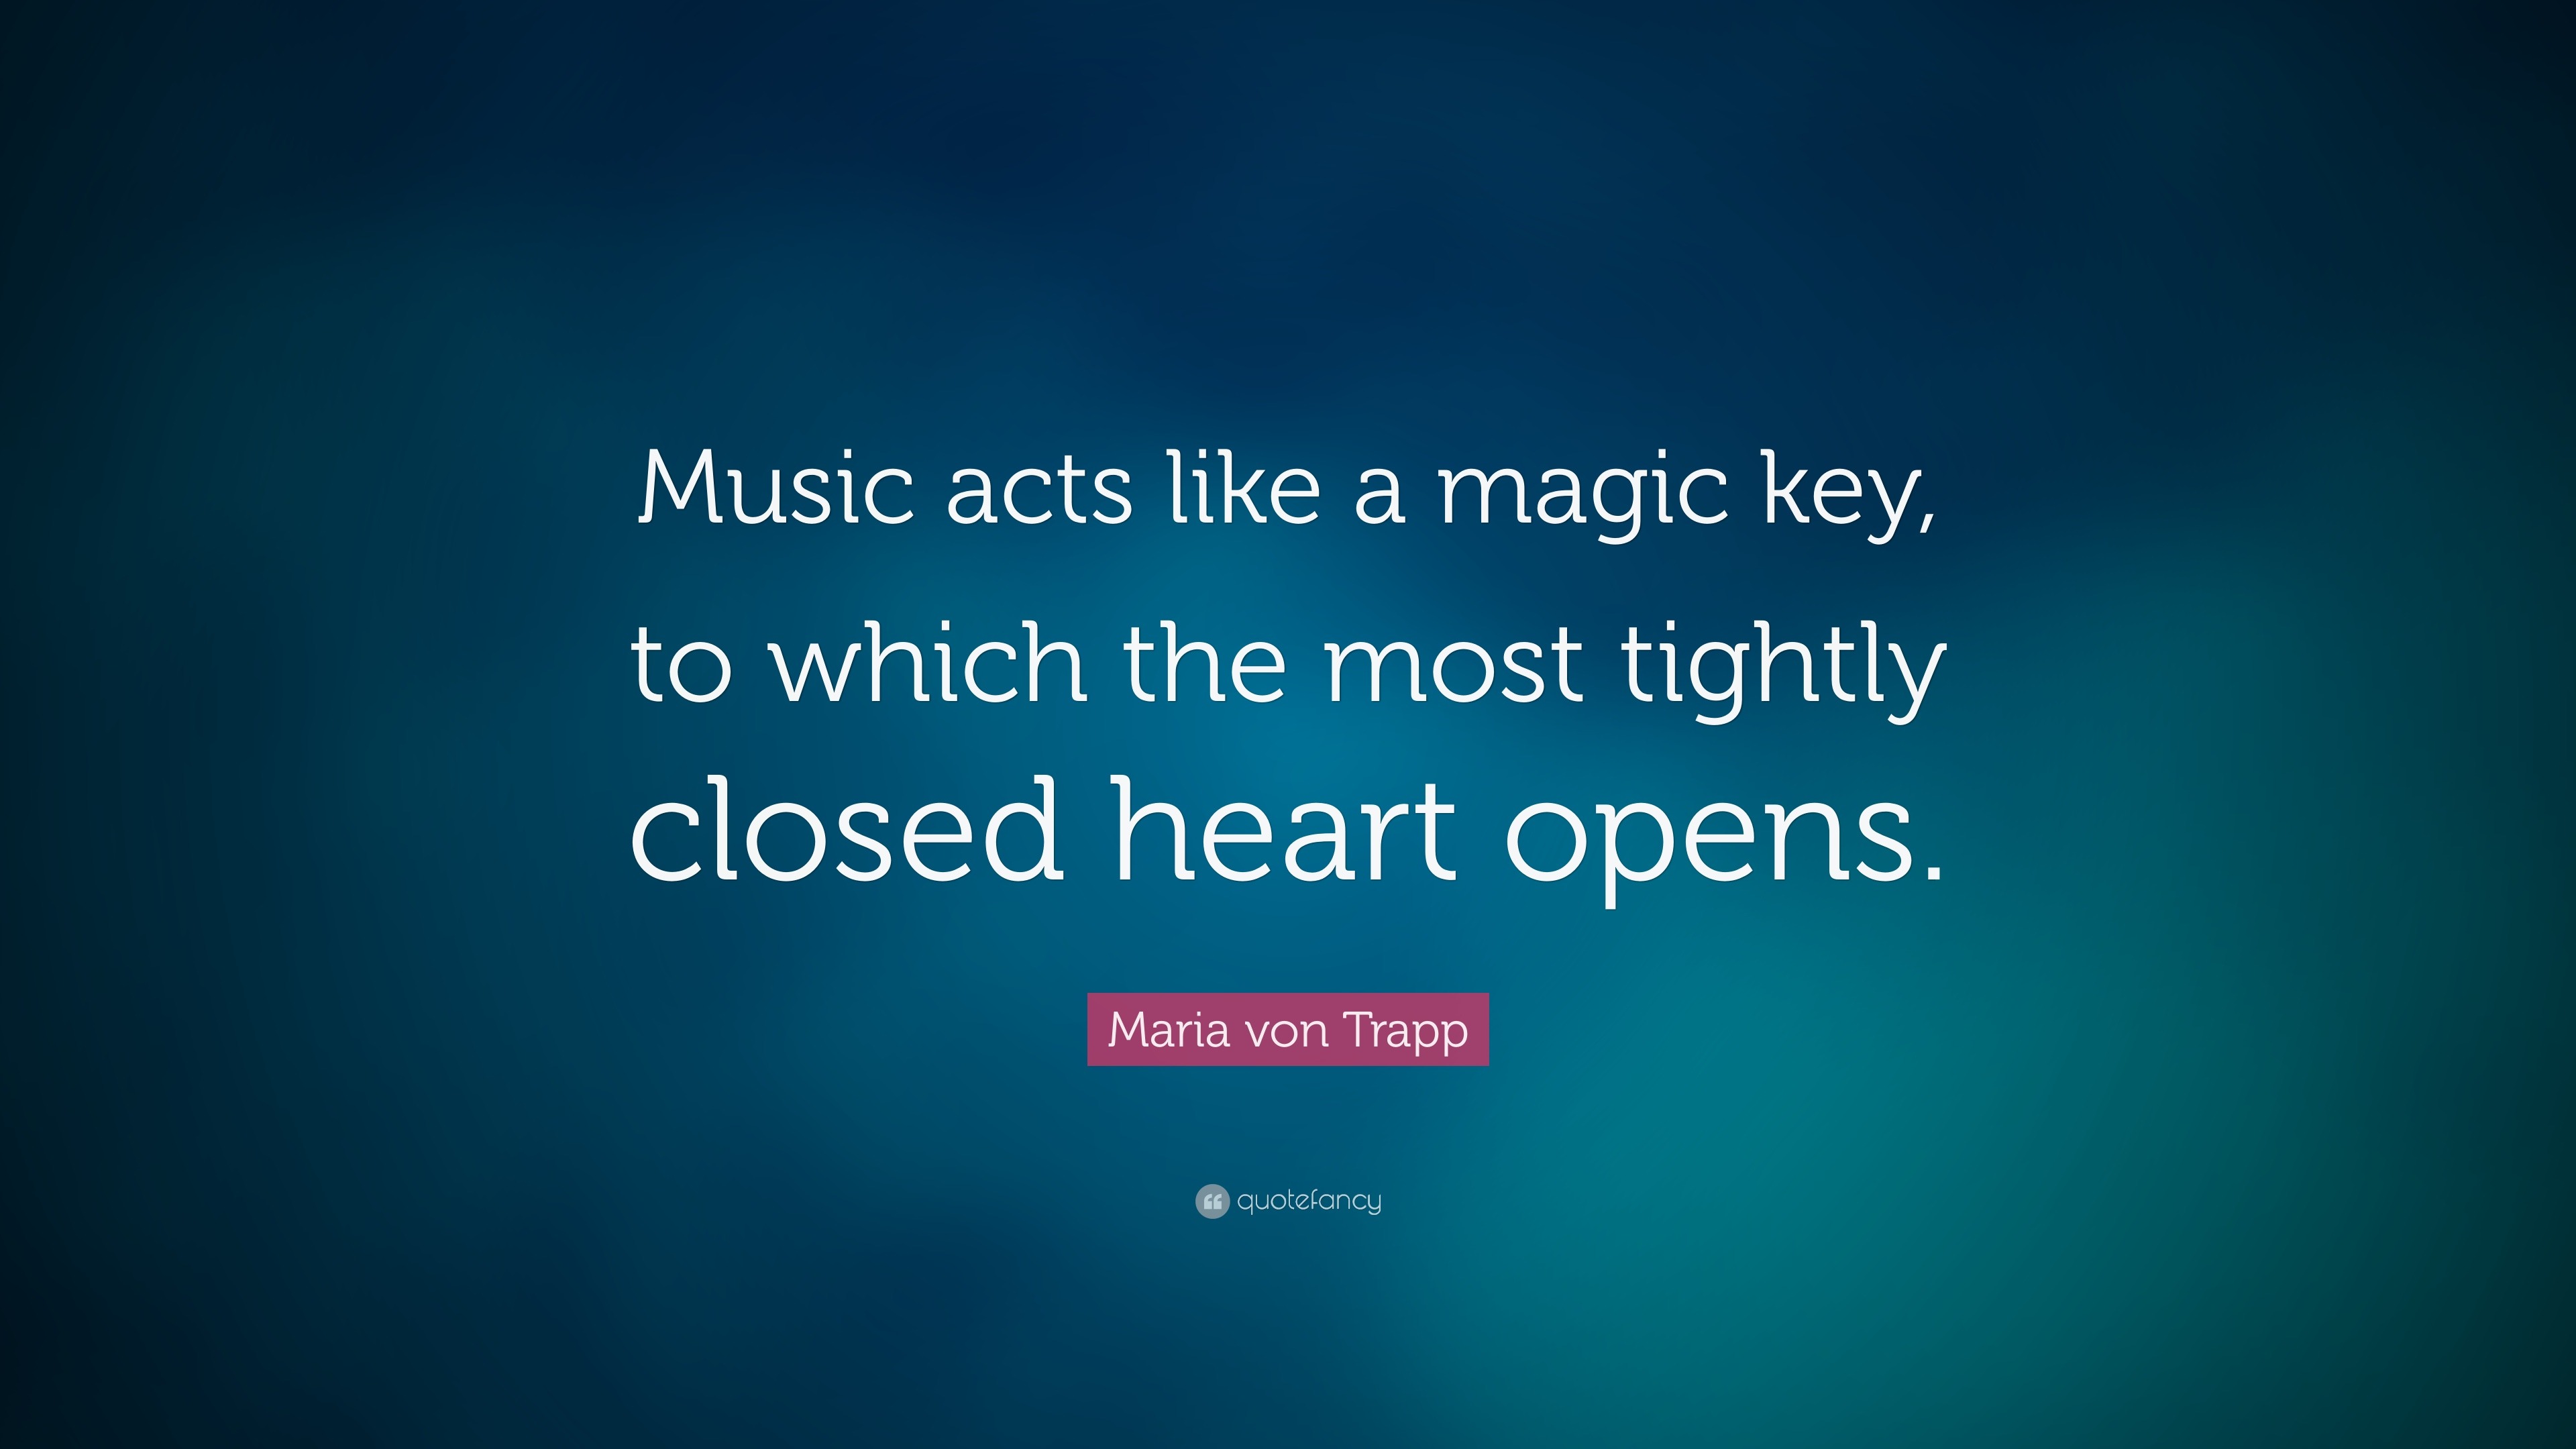 Maria von Trapp Quote: “Music acts like a magic key, to which the most tightly ...3840 x 2160